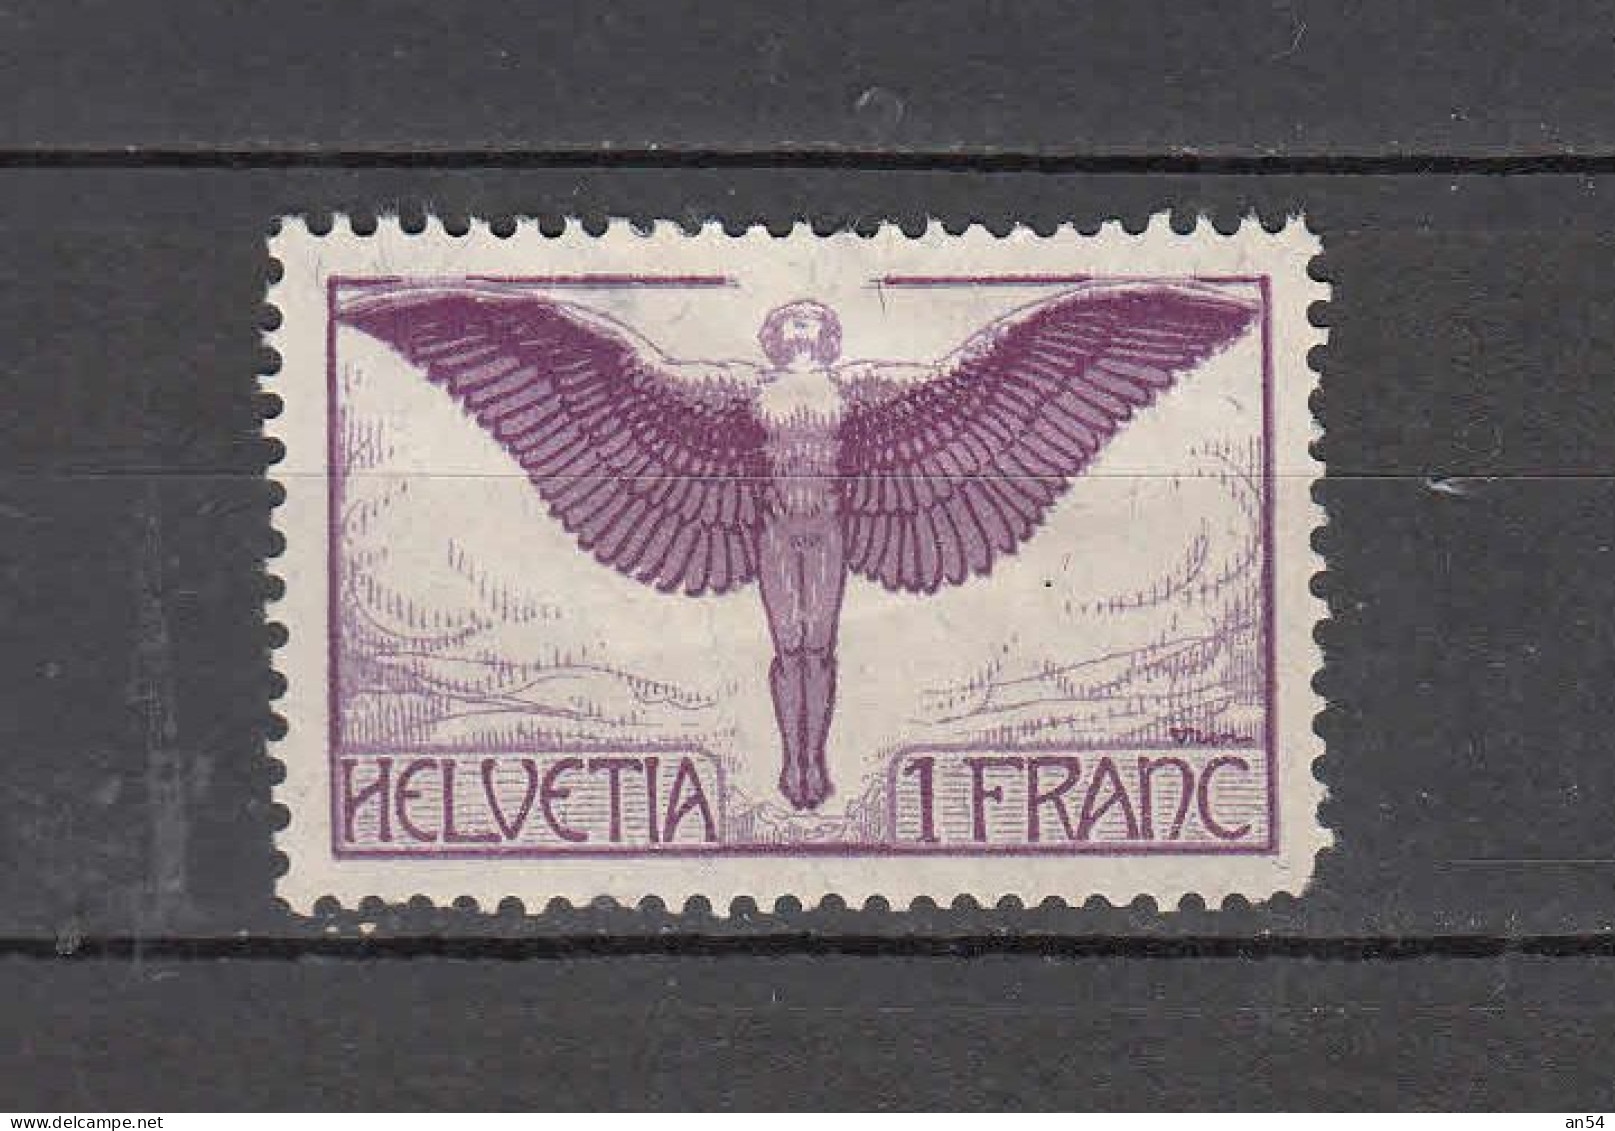 PA  1923/30  N°F12  NEUF*  COTE 80.00          CATALOGUE SBK - Unused Stamps